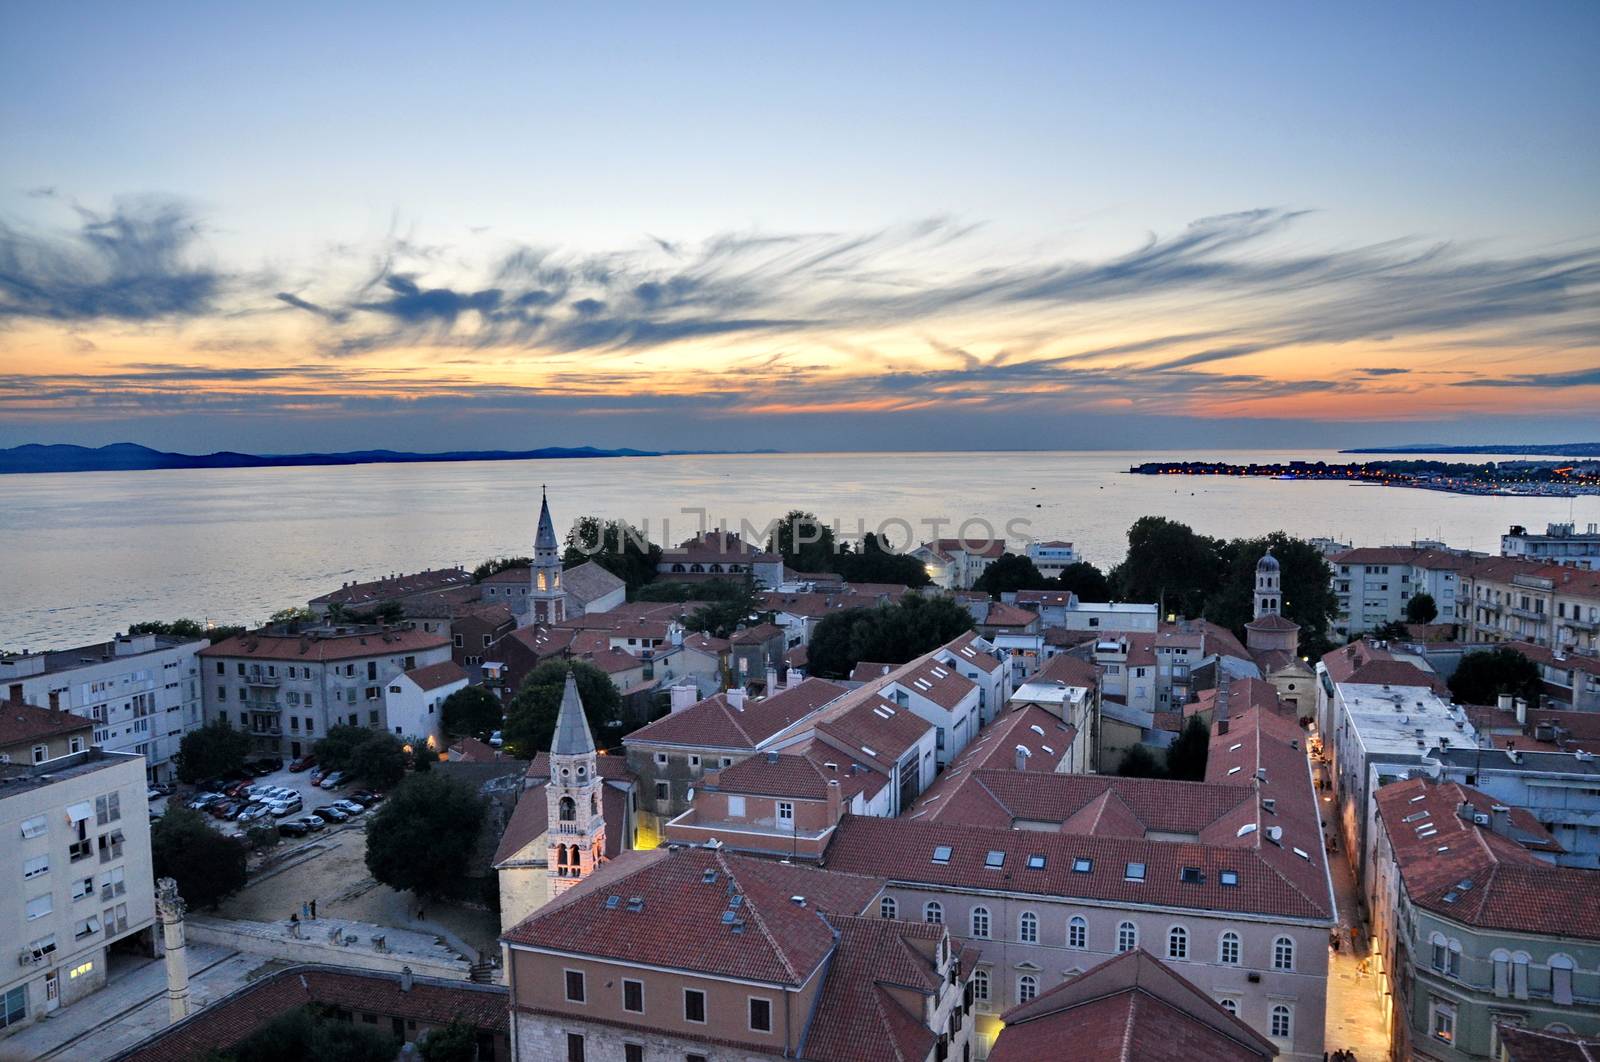 View of Zadar, Croatia from above at sunset by anderm